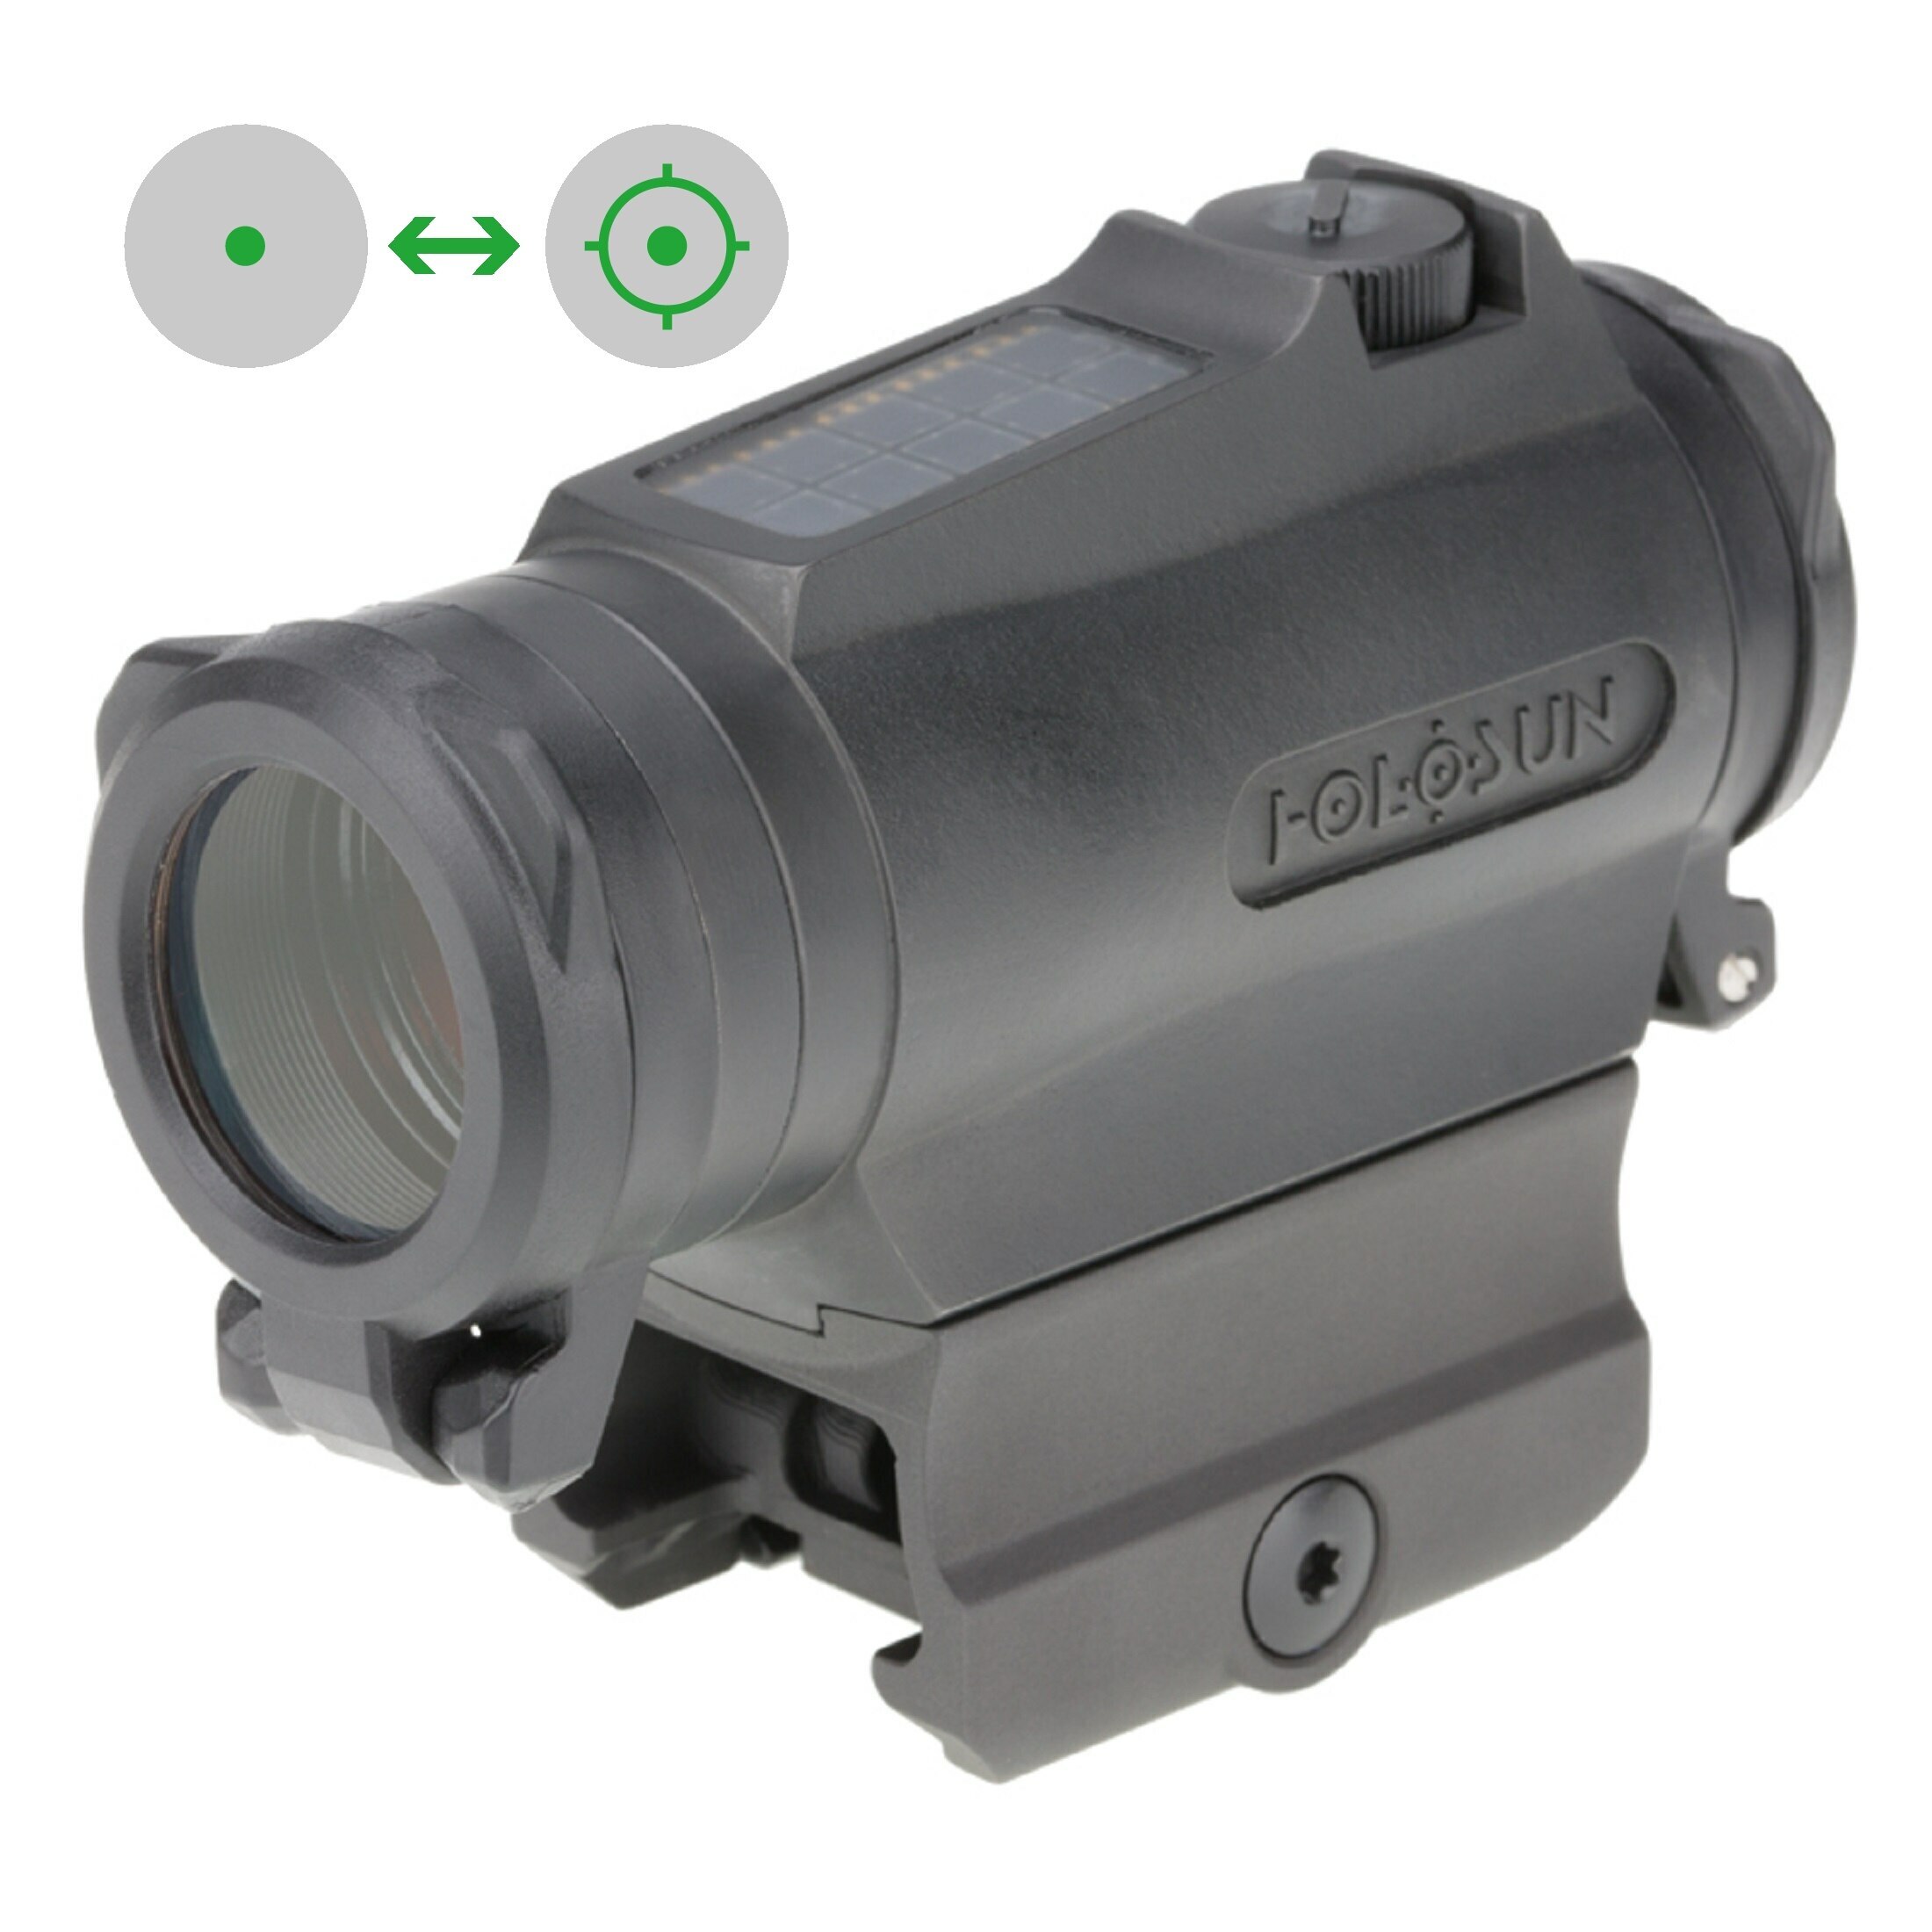 Holosun ELITE Green Dot Sight HE515C-T-GR switchable between Circle Dot and Single Dot